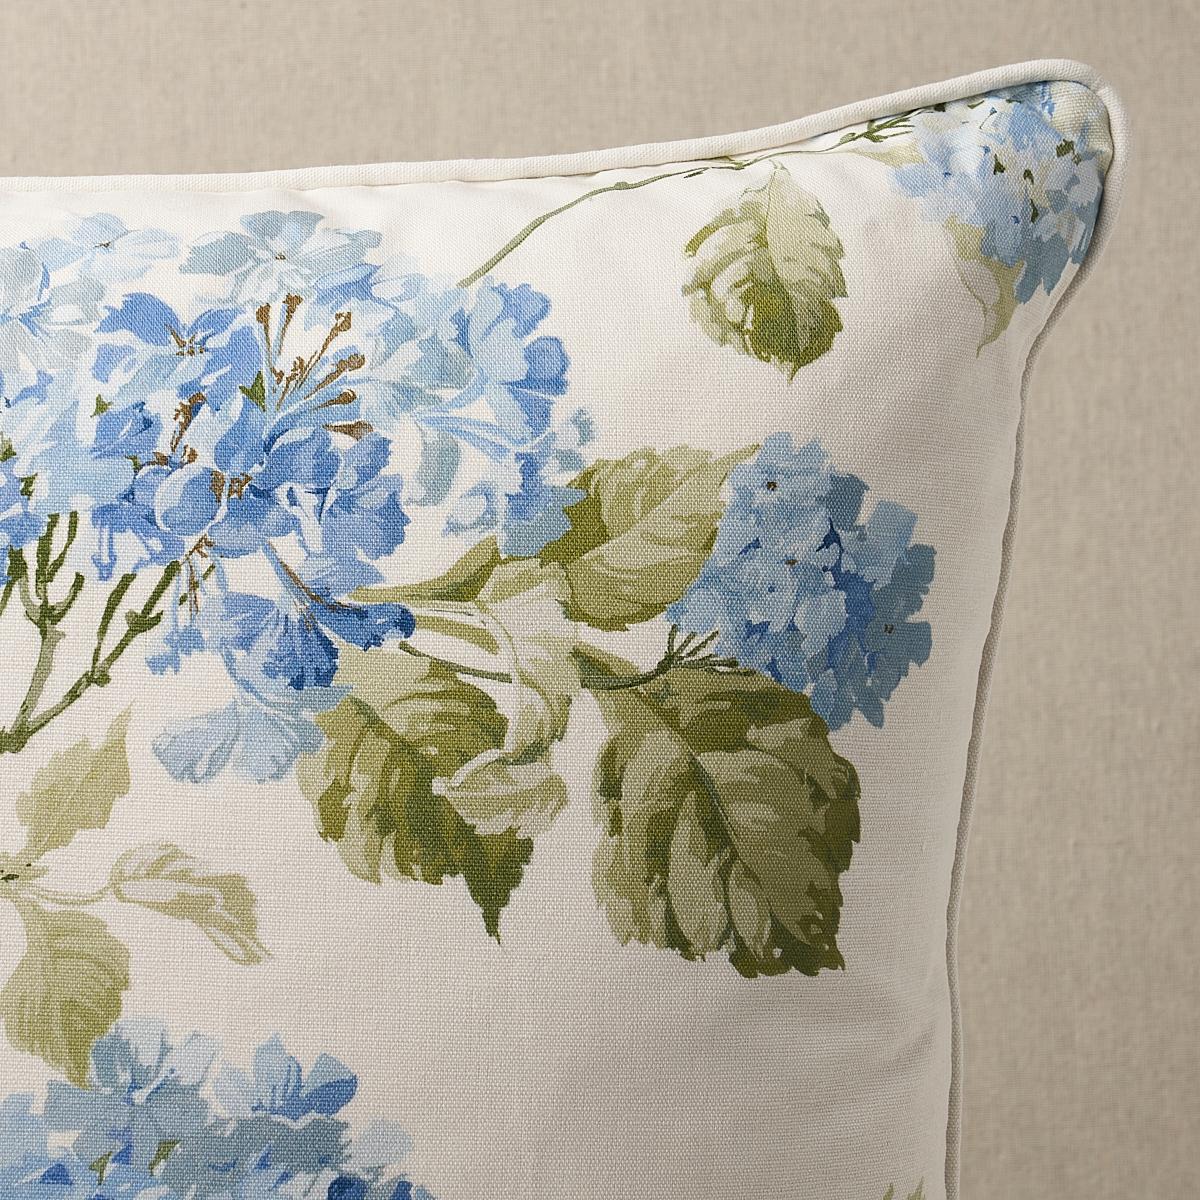 This pillow features Summer Hydrangea with a self welt finish. A classic floral with a painterly look, Summer Hydrangea in blue hydrangea is beautifully printed on a soft textured cotton-linen ground. Pillow includes a feather/down fill insert and